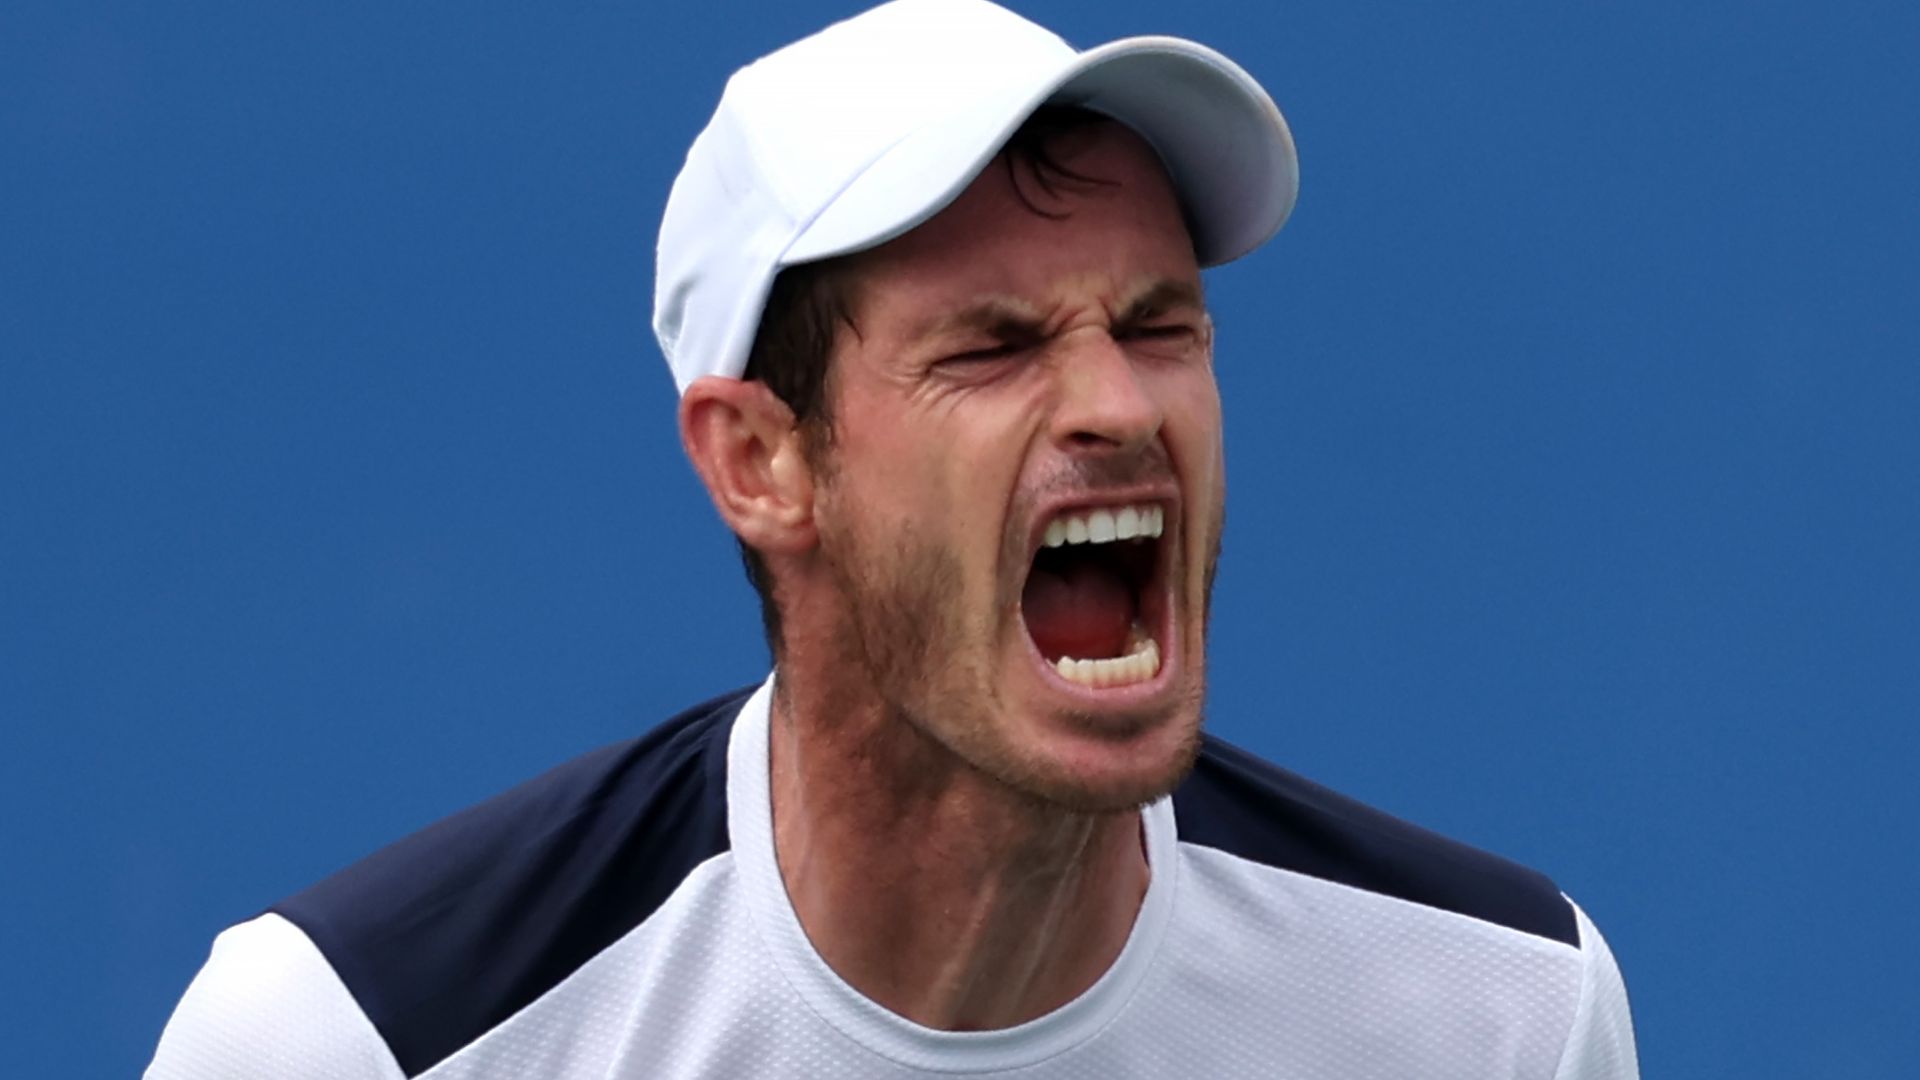 Murray loses to Fritz at Washington Open after climate protest interruption